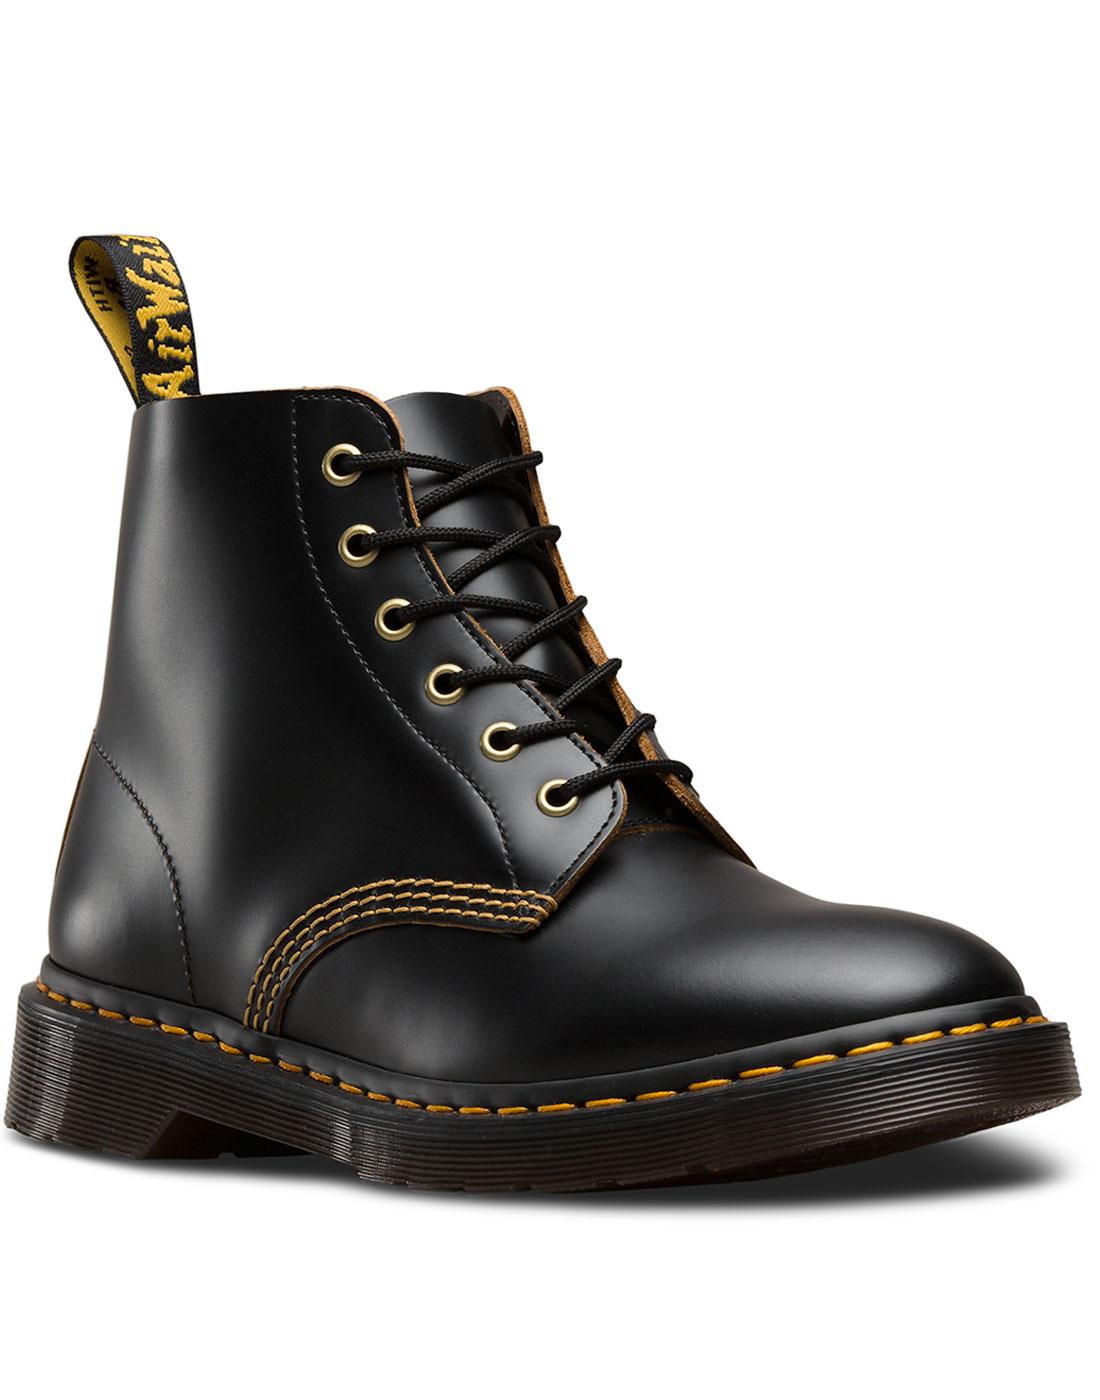 101 Archive DR MARTENS Mod 6 Eyelet Ankle Boots B